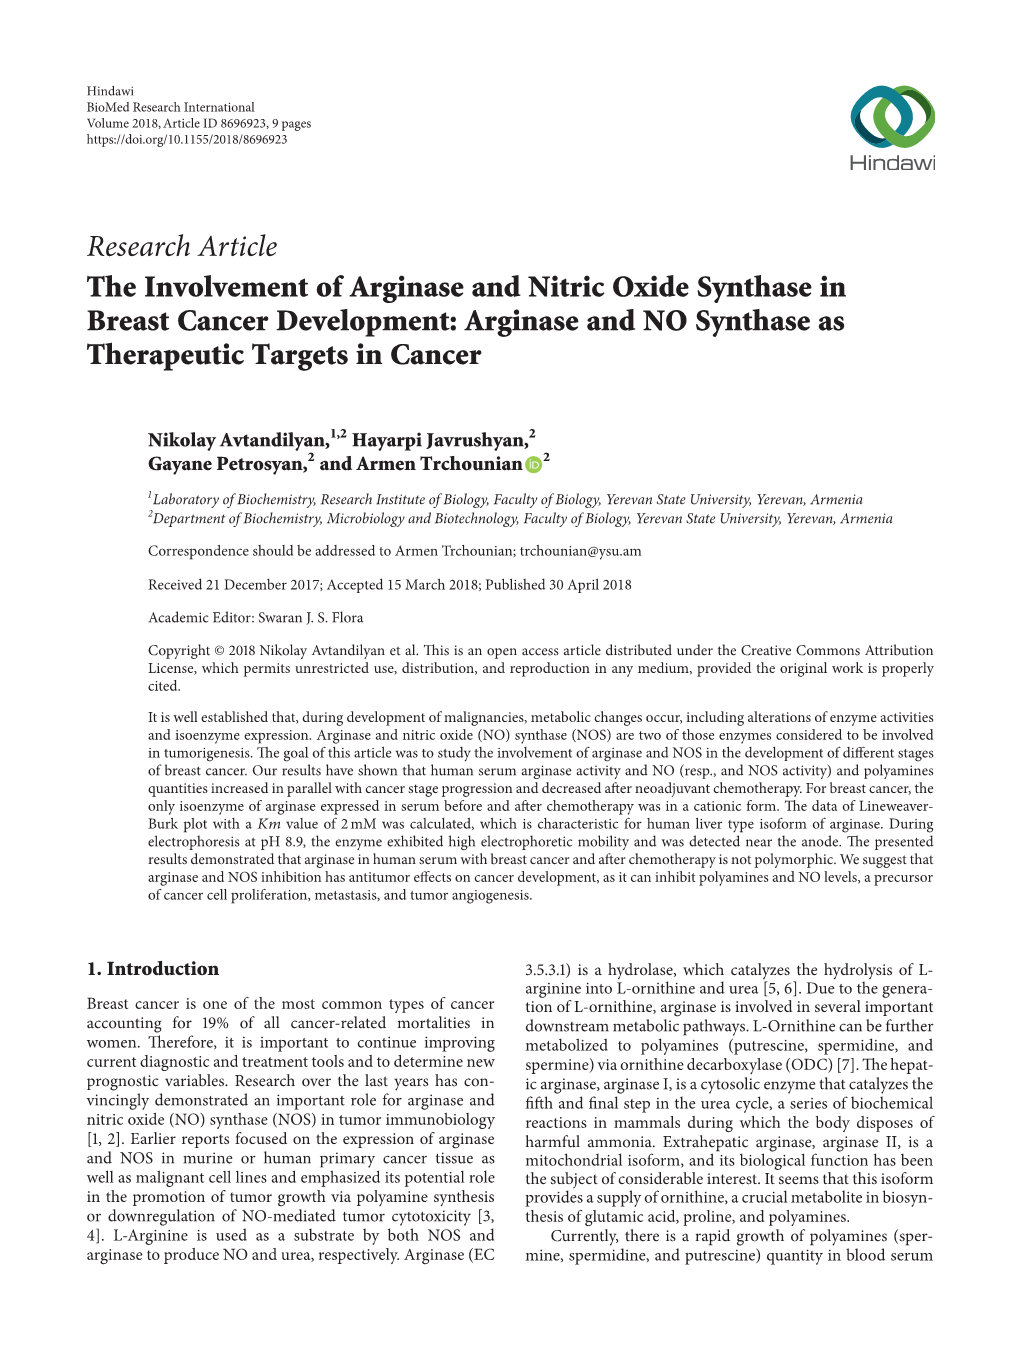 The Involvement of Arginase and Nitric Oxide Synthase in Breast Cancer Development: Arginase and NO Synthase As Therapeutic Targets in Cancer